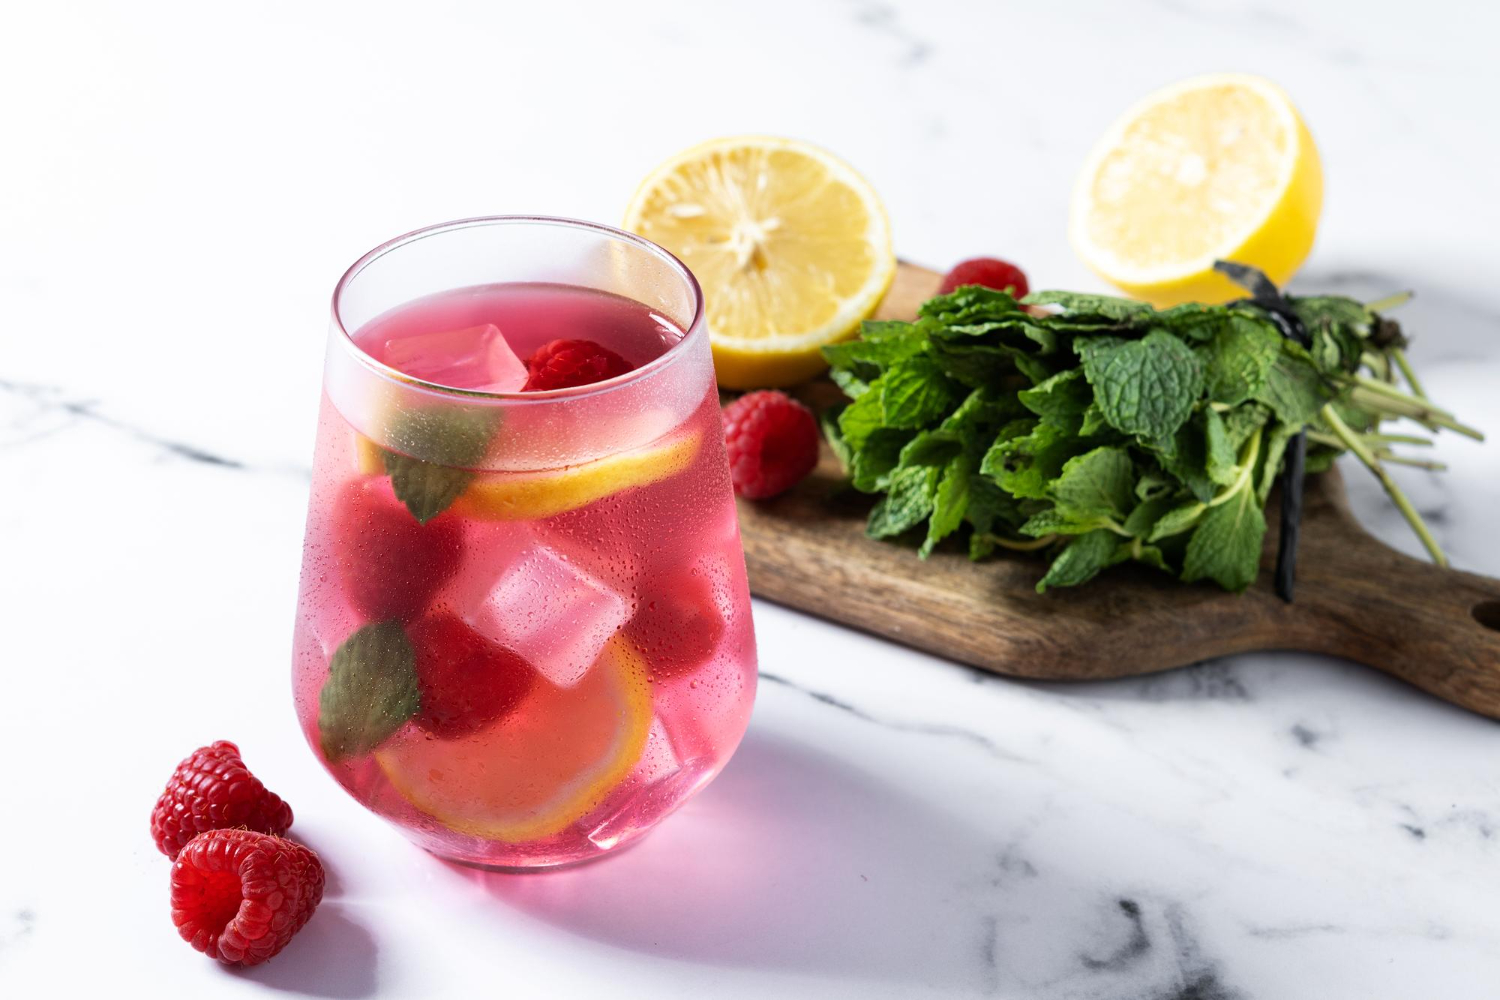 A glass of pink colored hard seltzer garnished with lemon, raspberries, and mint leaves sits next to a small serving board filled with a bunch of mint leaves, a lemon sliced in half, and fresh raspberries.